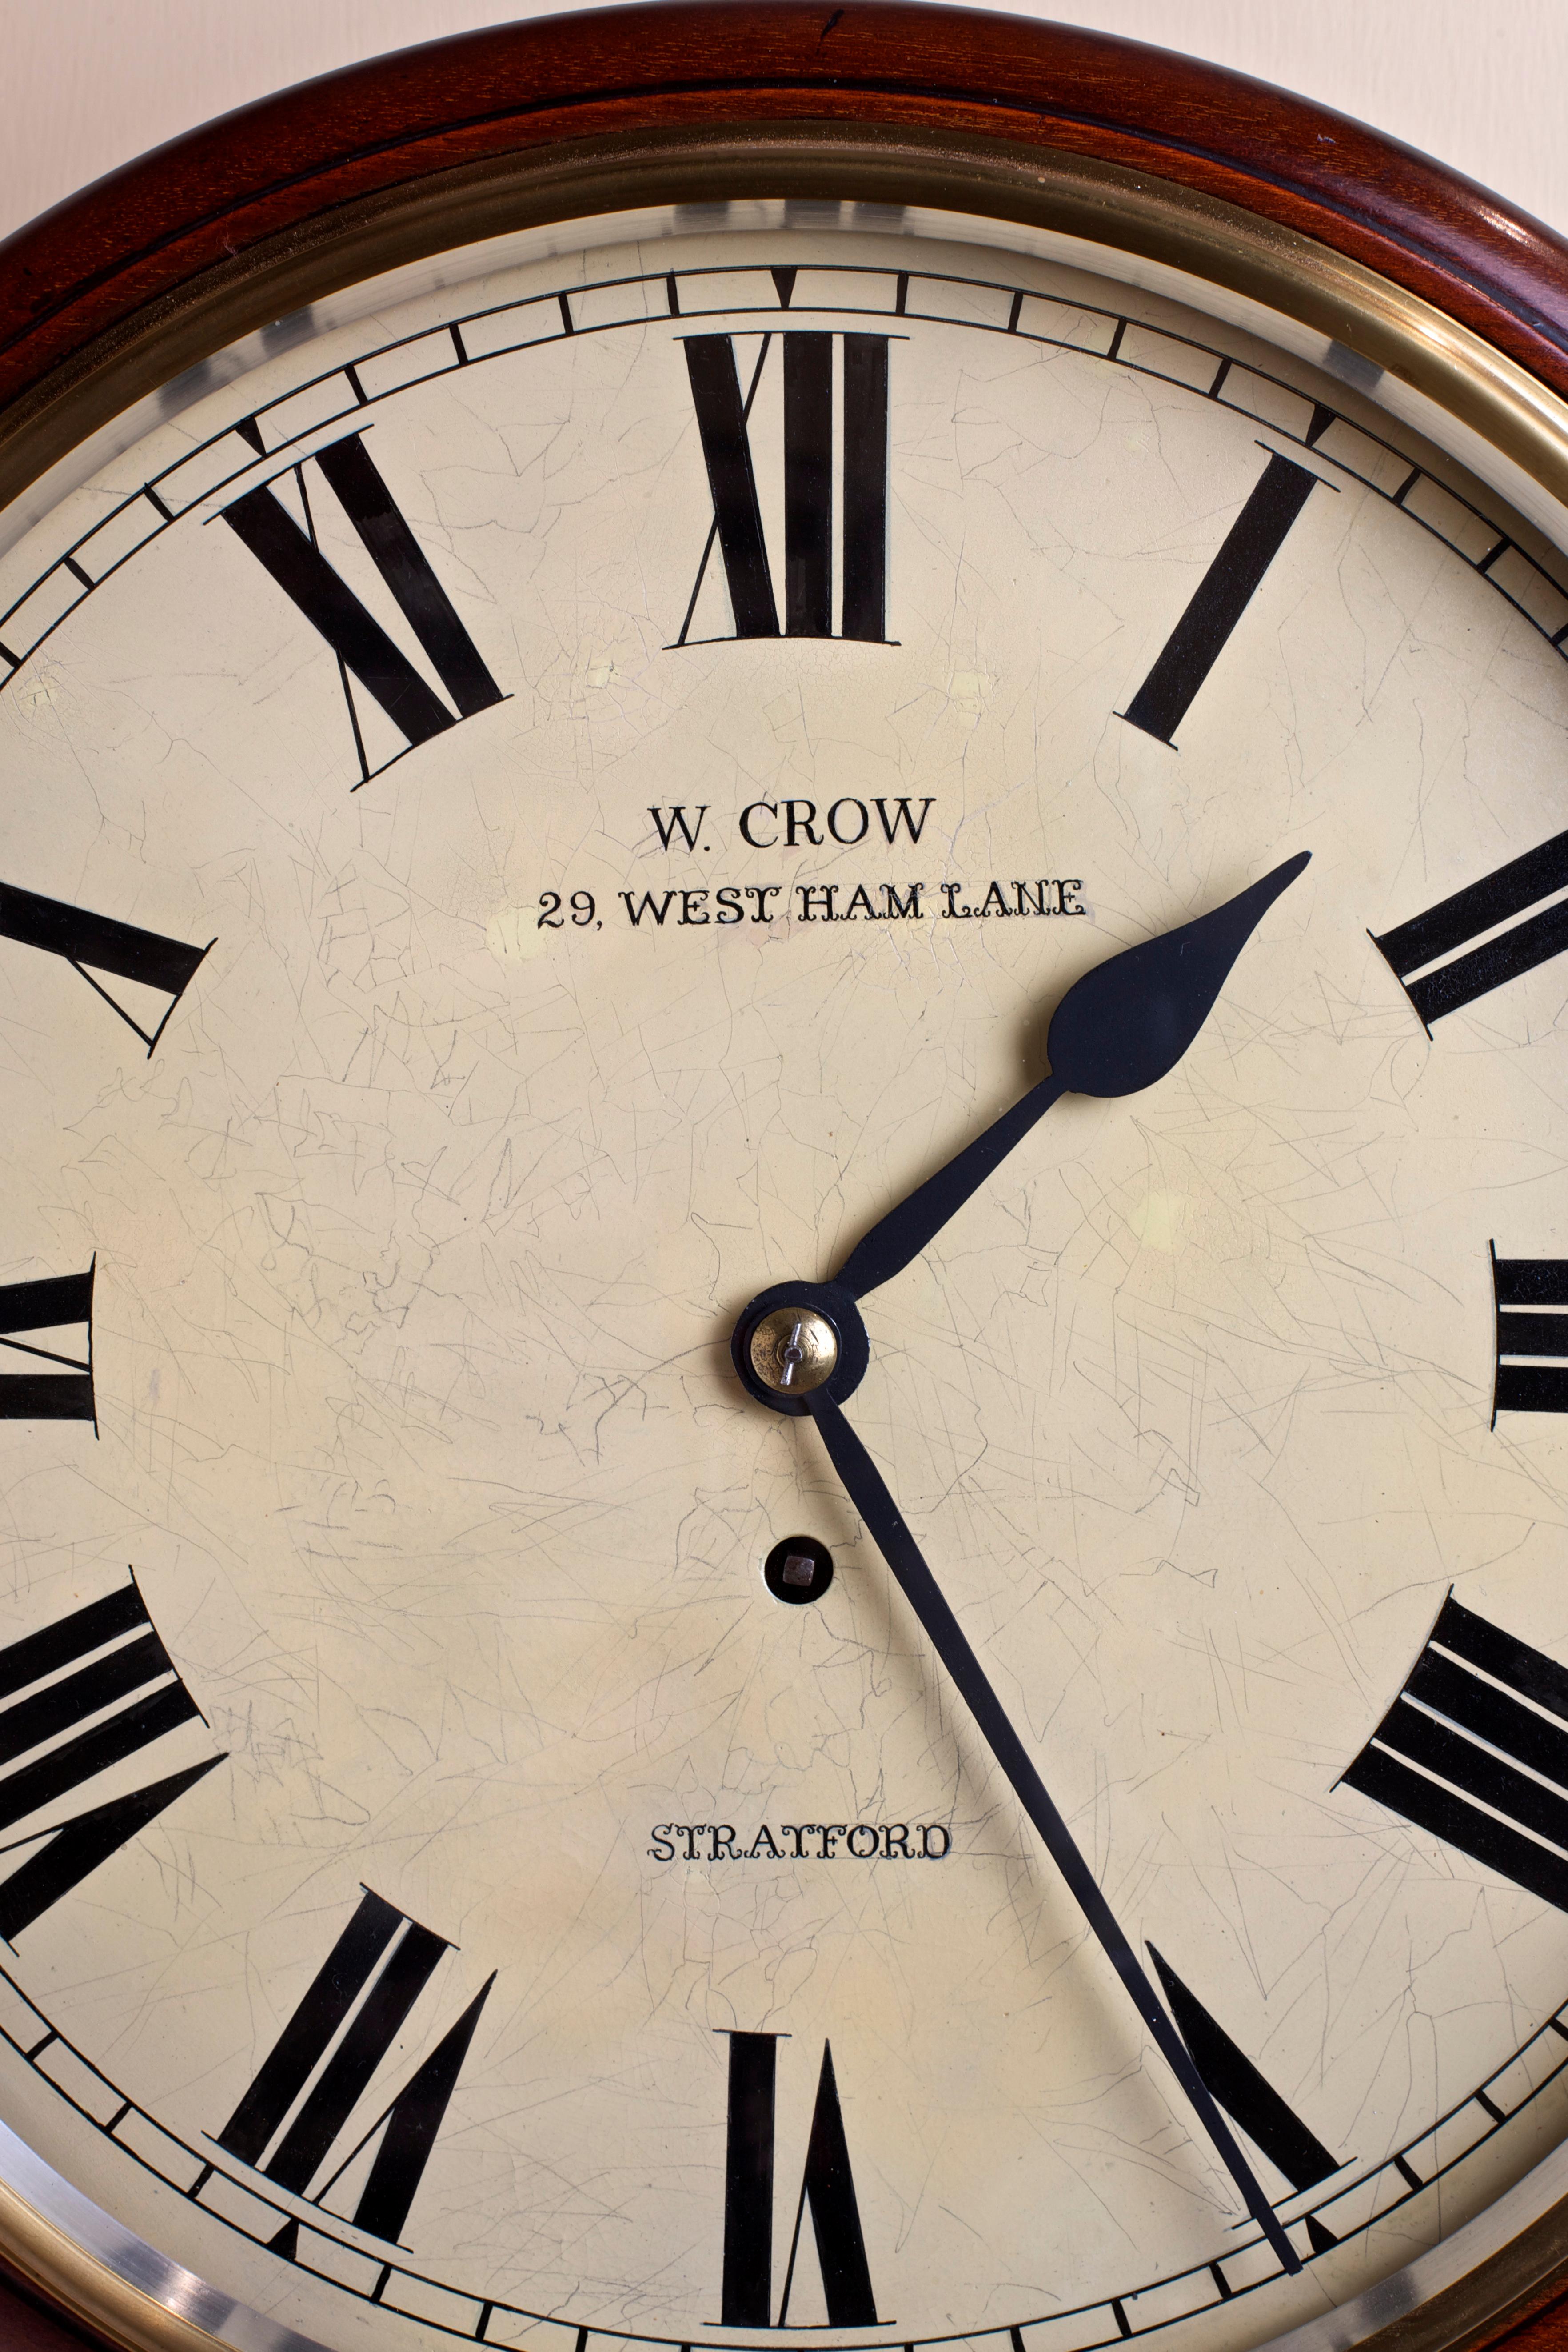 Edwardian mahogany round dial clock, painted dial with Roman numerals signed W.Crow, 29, West Ham Lane, Stratford. Eight day fuse movement.

The case also bears its original sale label from ‘W.Crow. Watch and clock maker, jeweler and optician’.